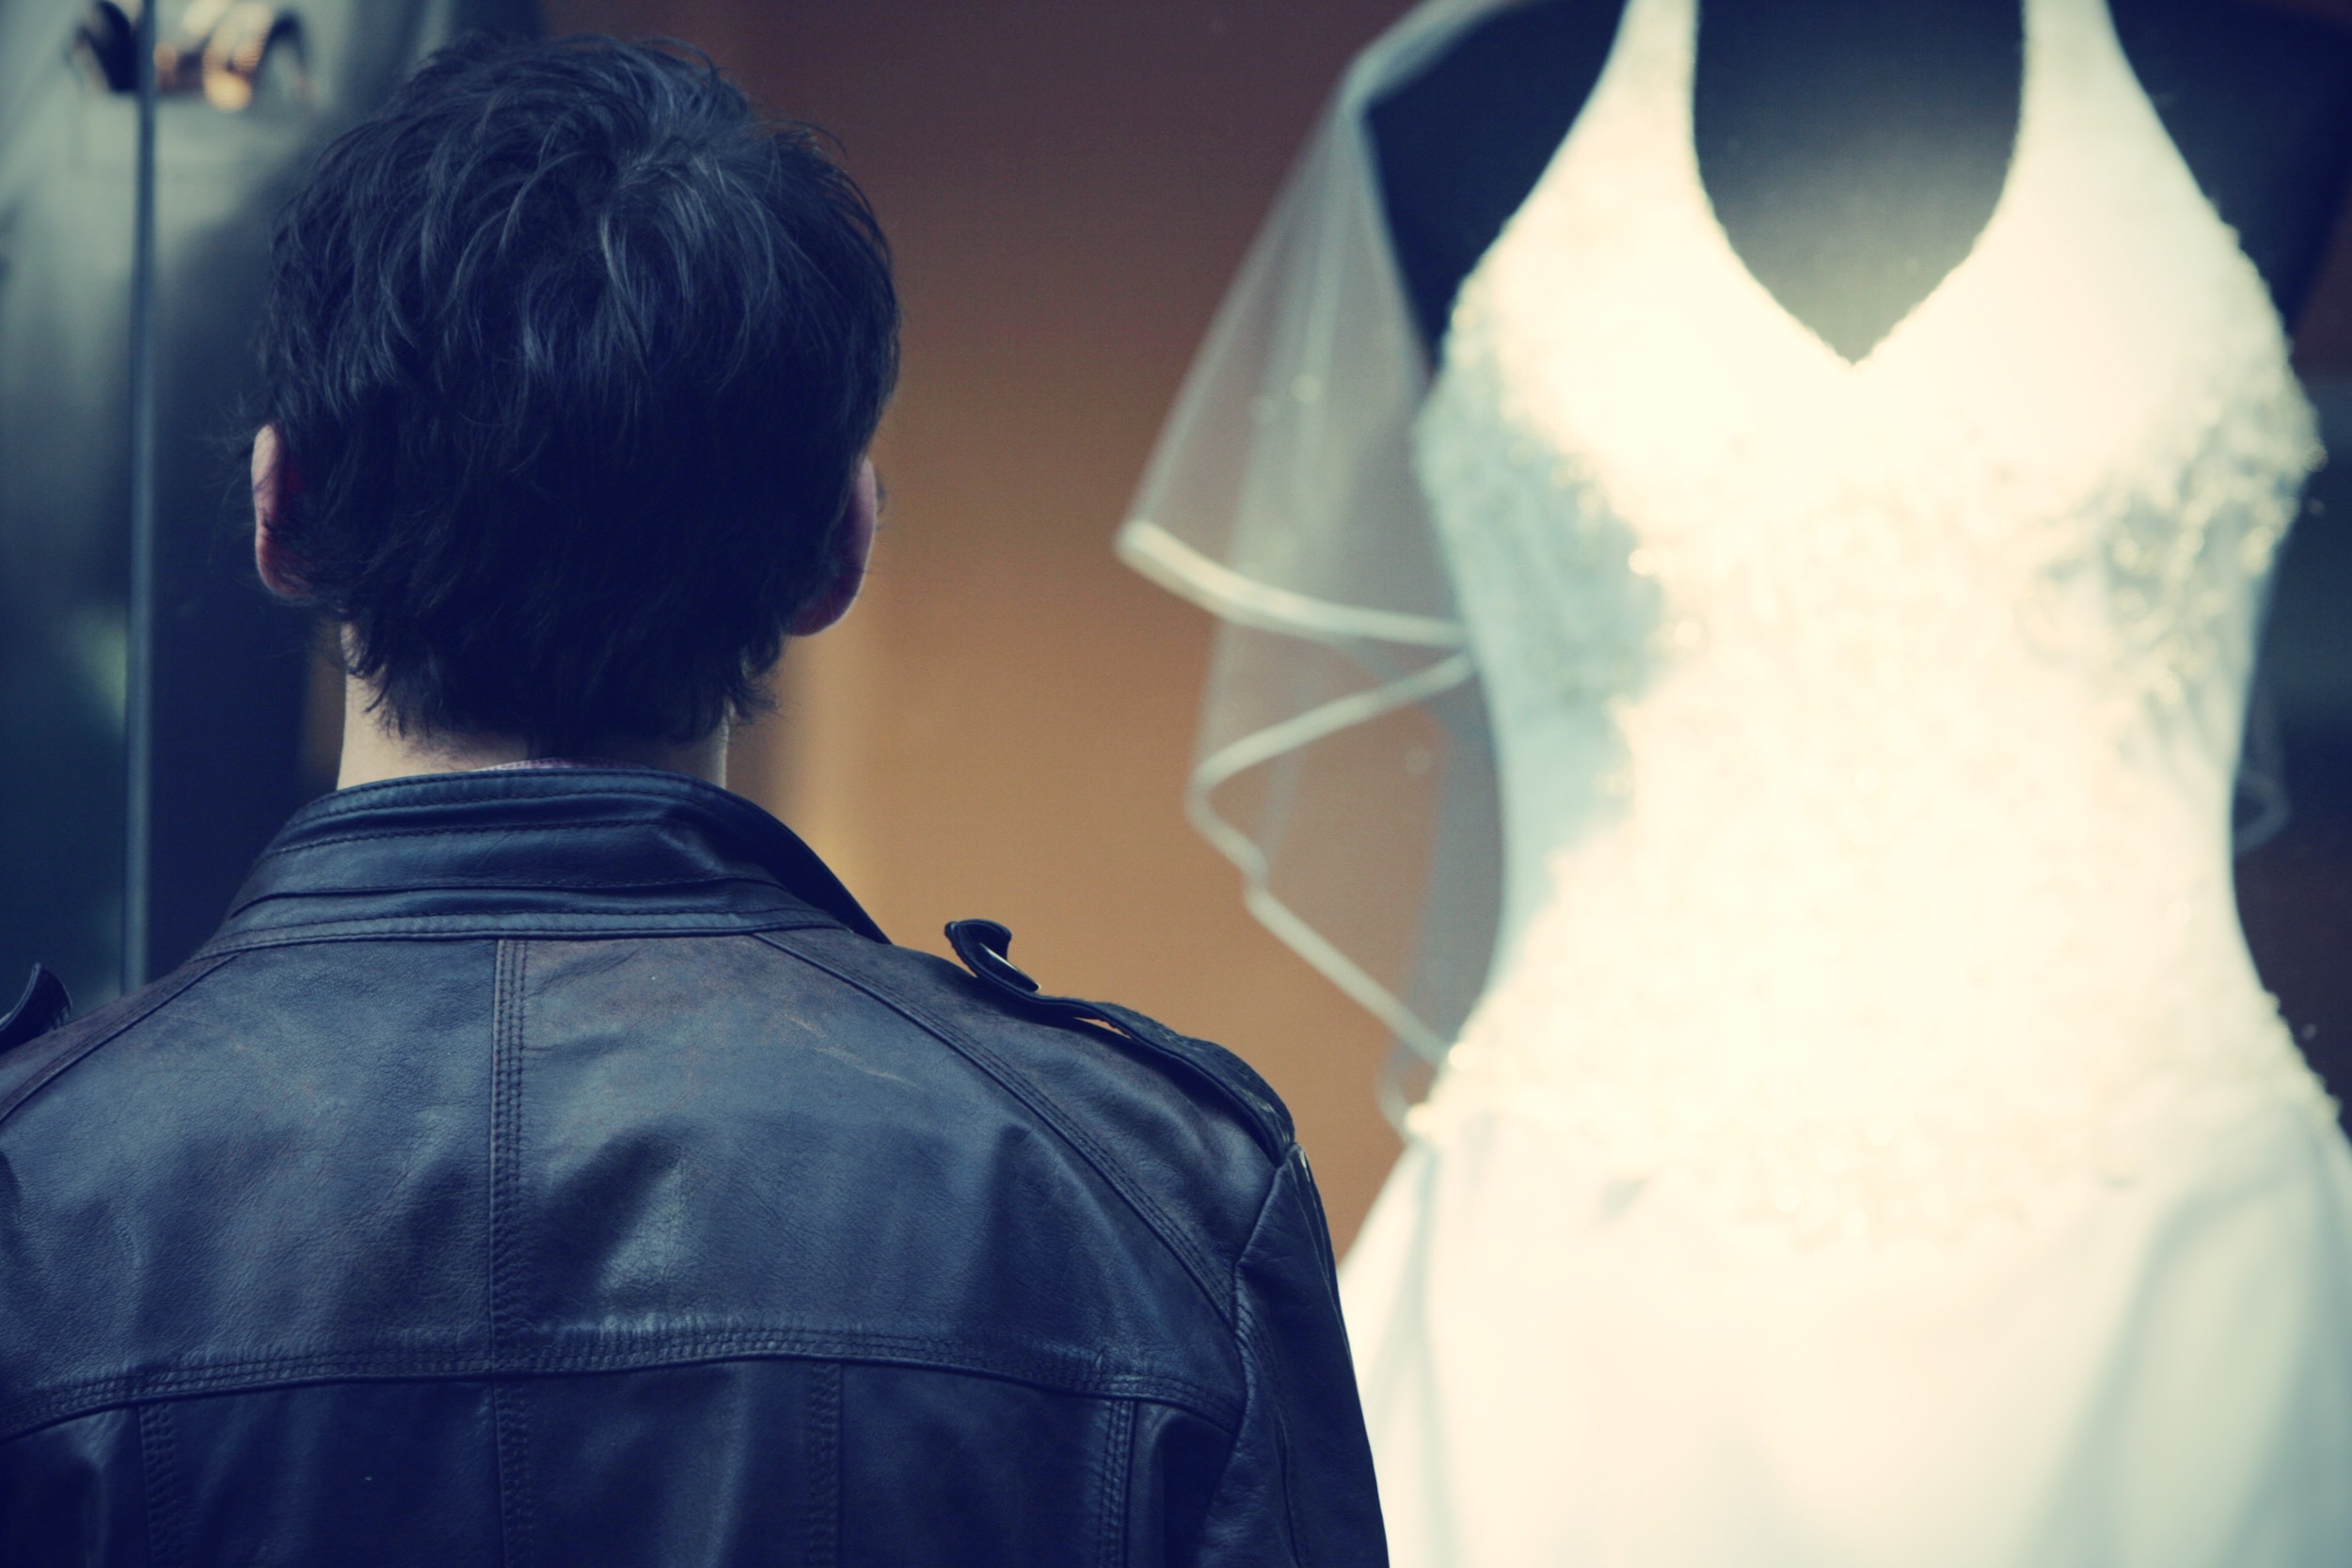 men's black leather jacket and women's white bridal gown